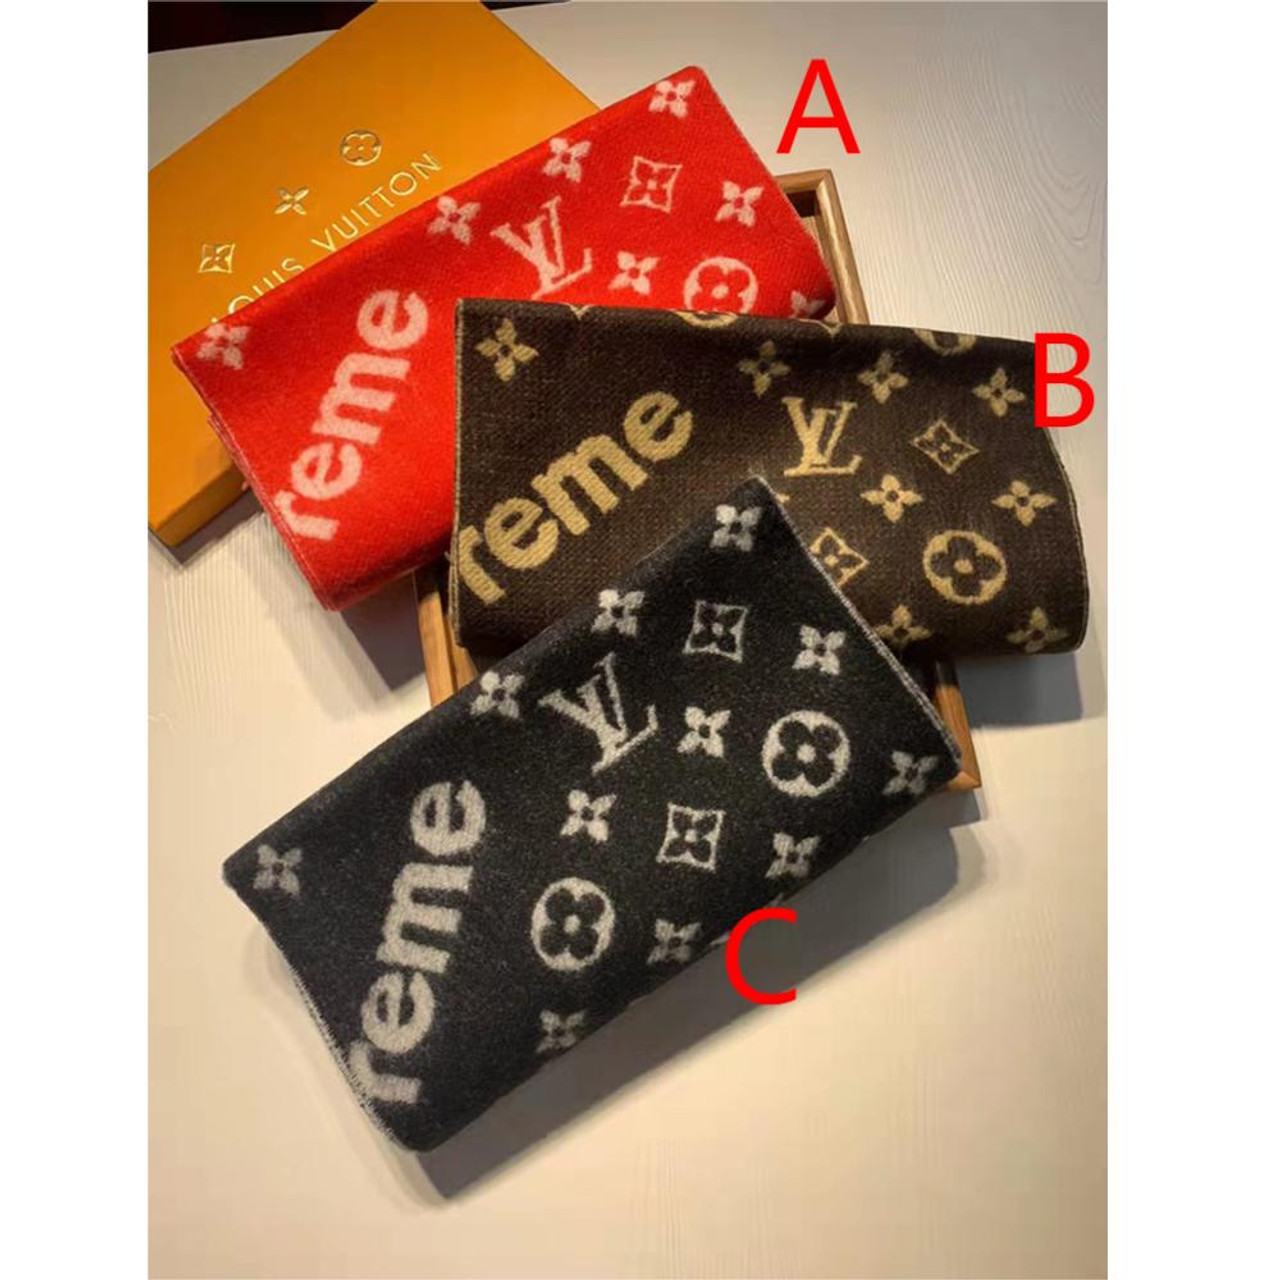 Best (fake) Supreme X Louis Vuitton for sale in Oshawa, Ontario for 2023